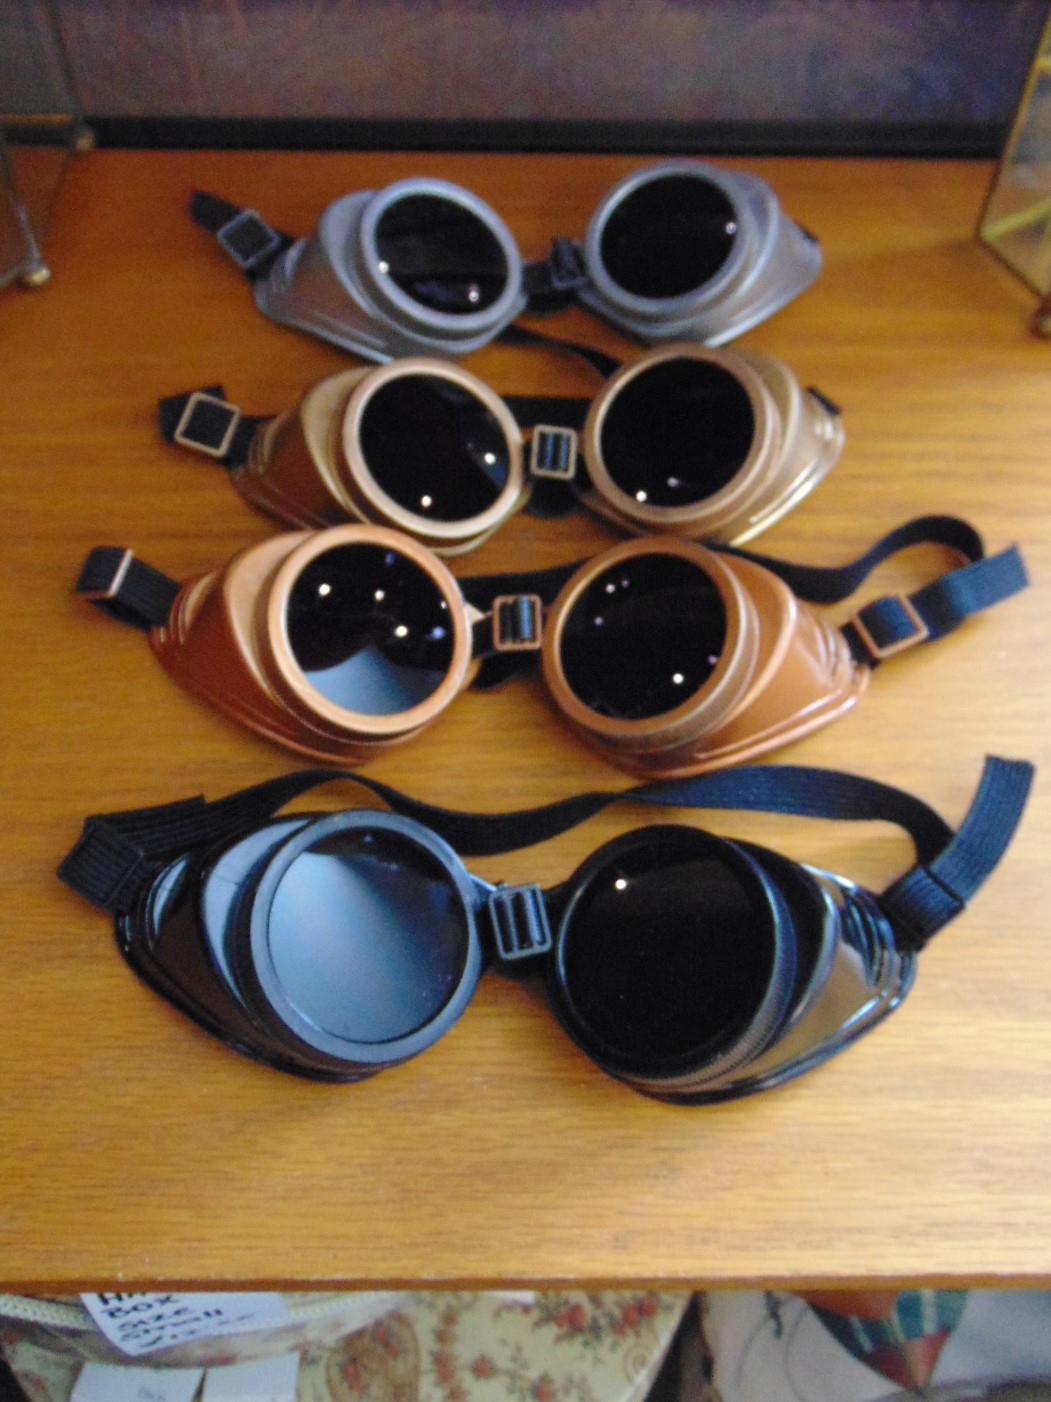 Goggles - vintage style with choice of lens colour.